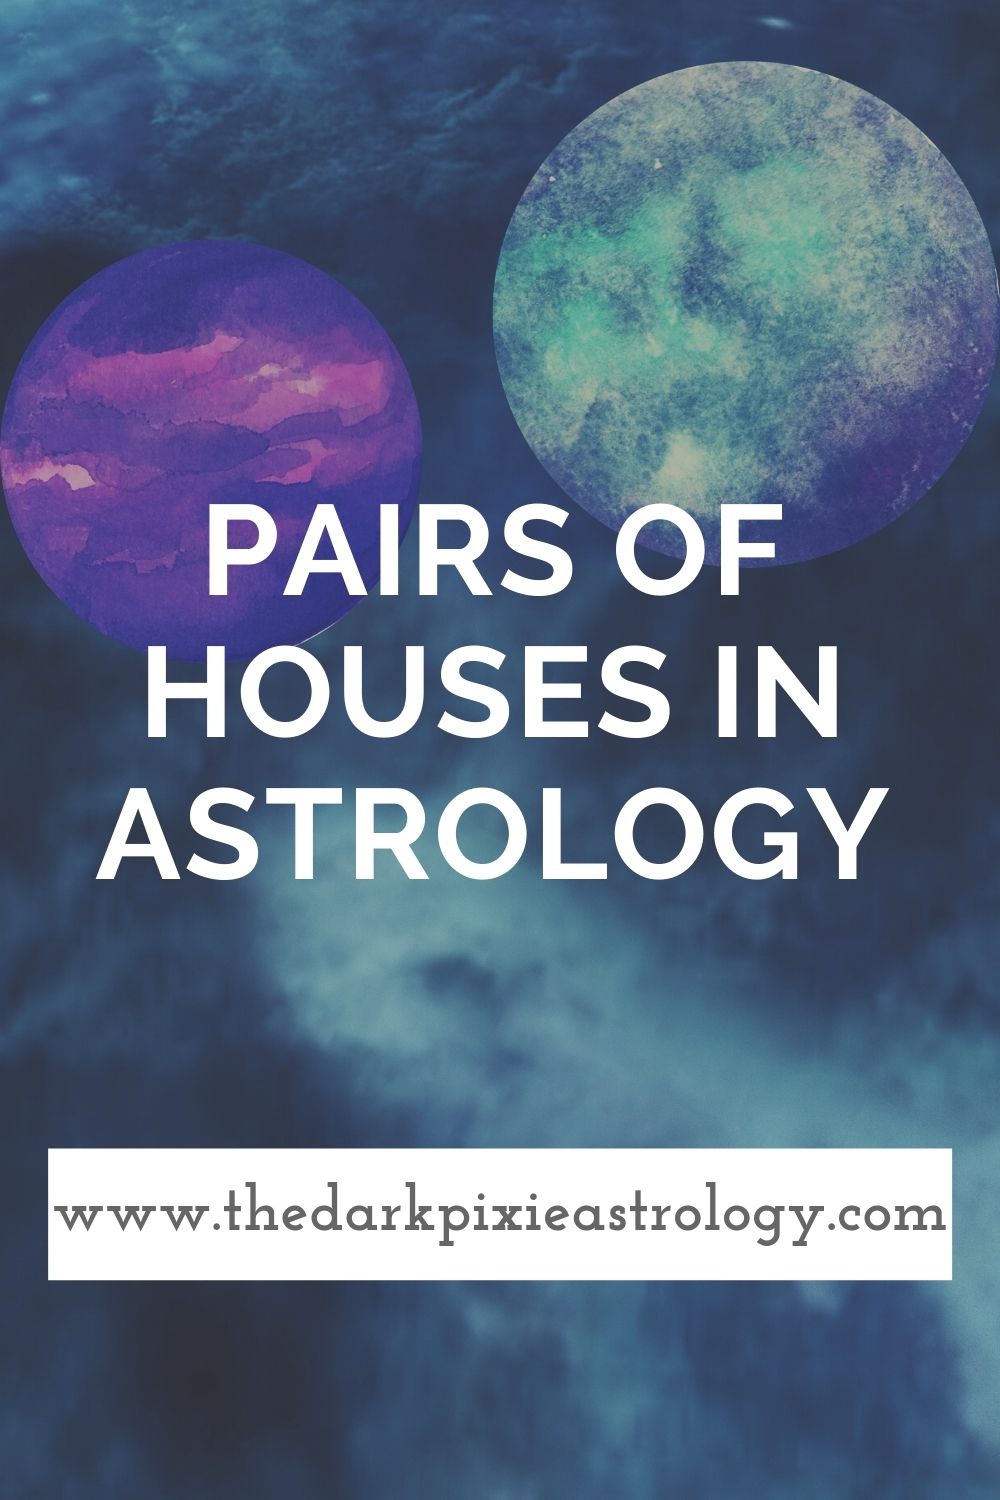 Pairs of Houses in Astrology - The Dark Pixie Astrology